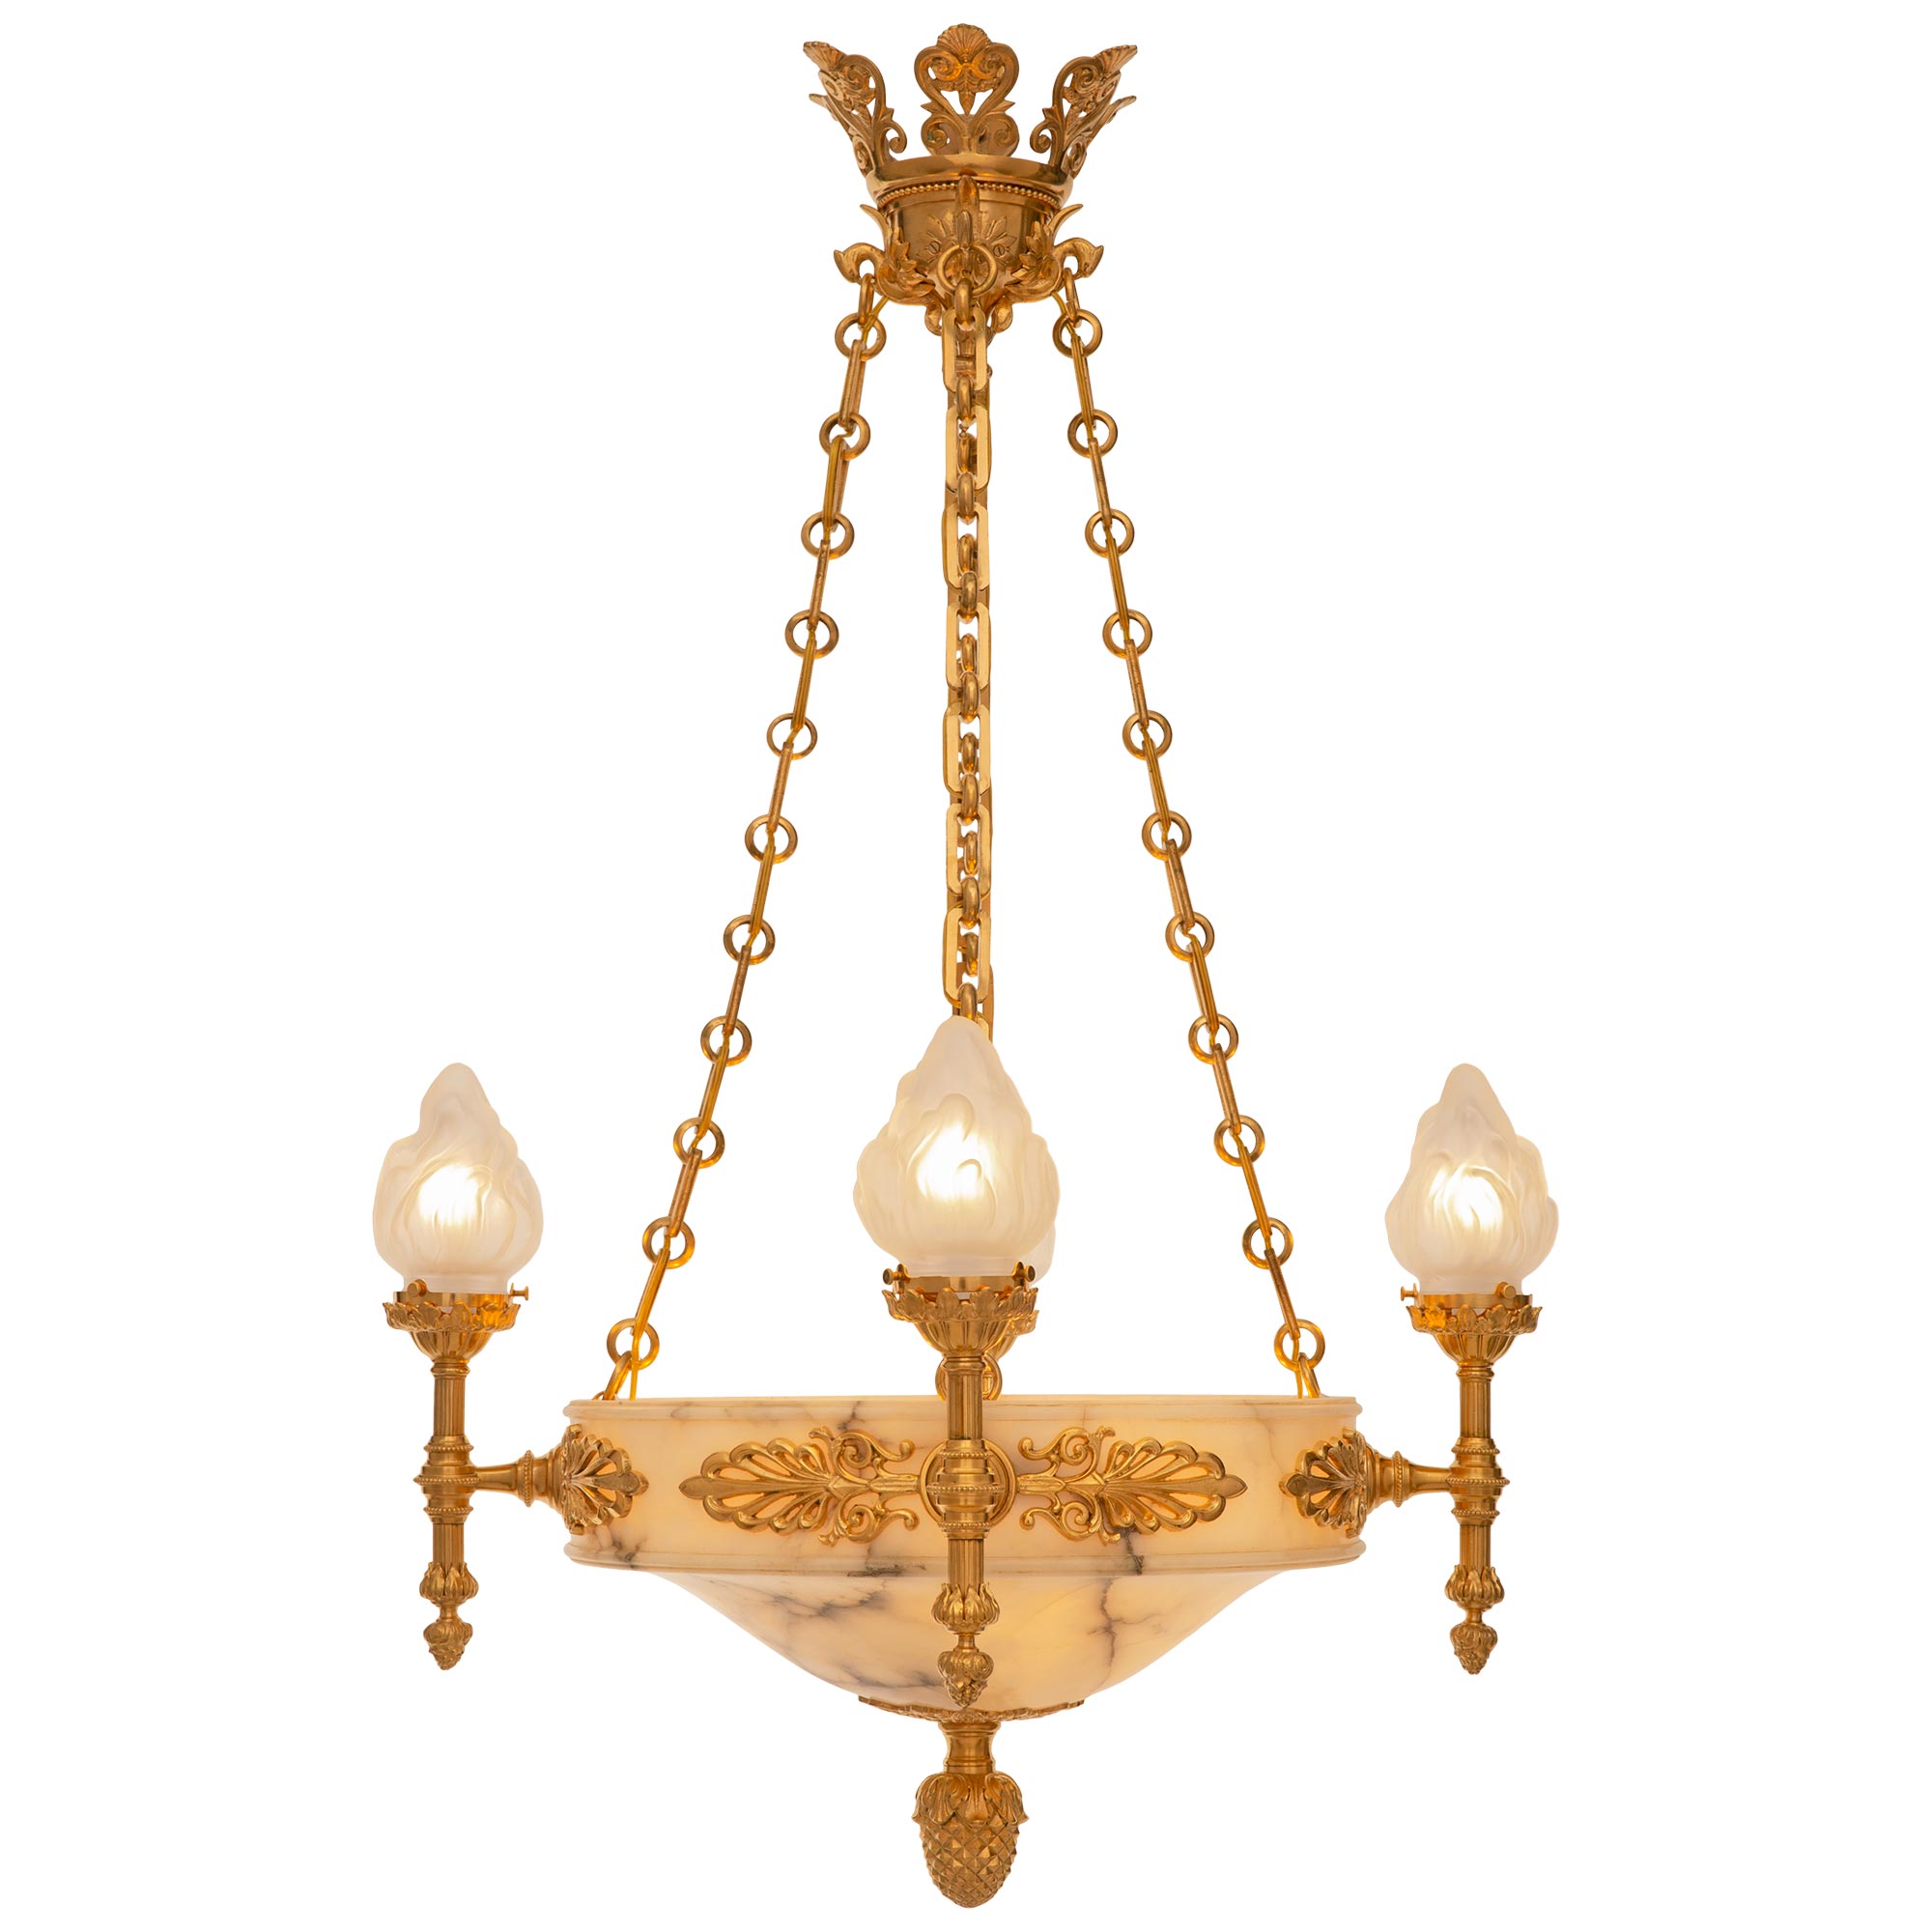 French 19th Century Empire St. Alabaster And Ormolu Chandelier